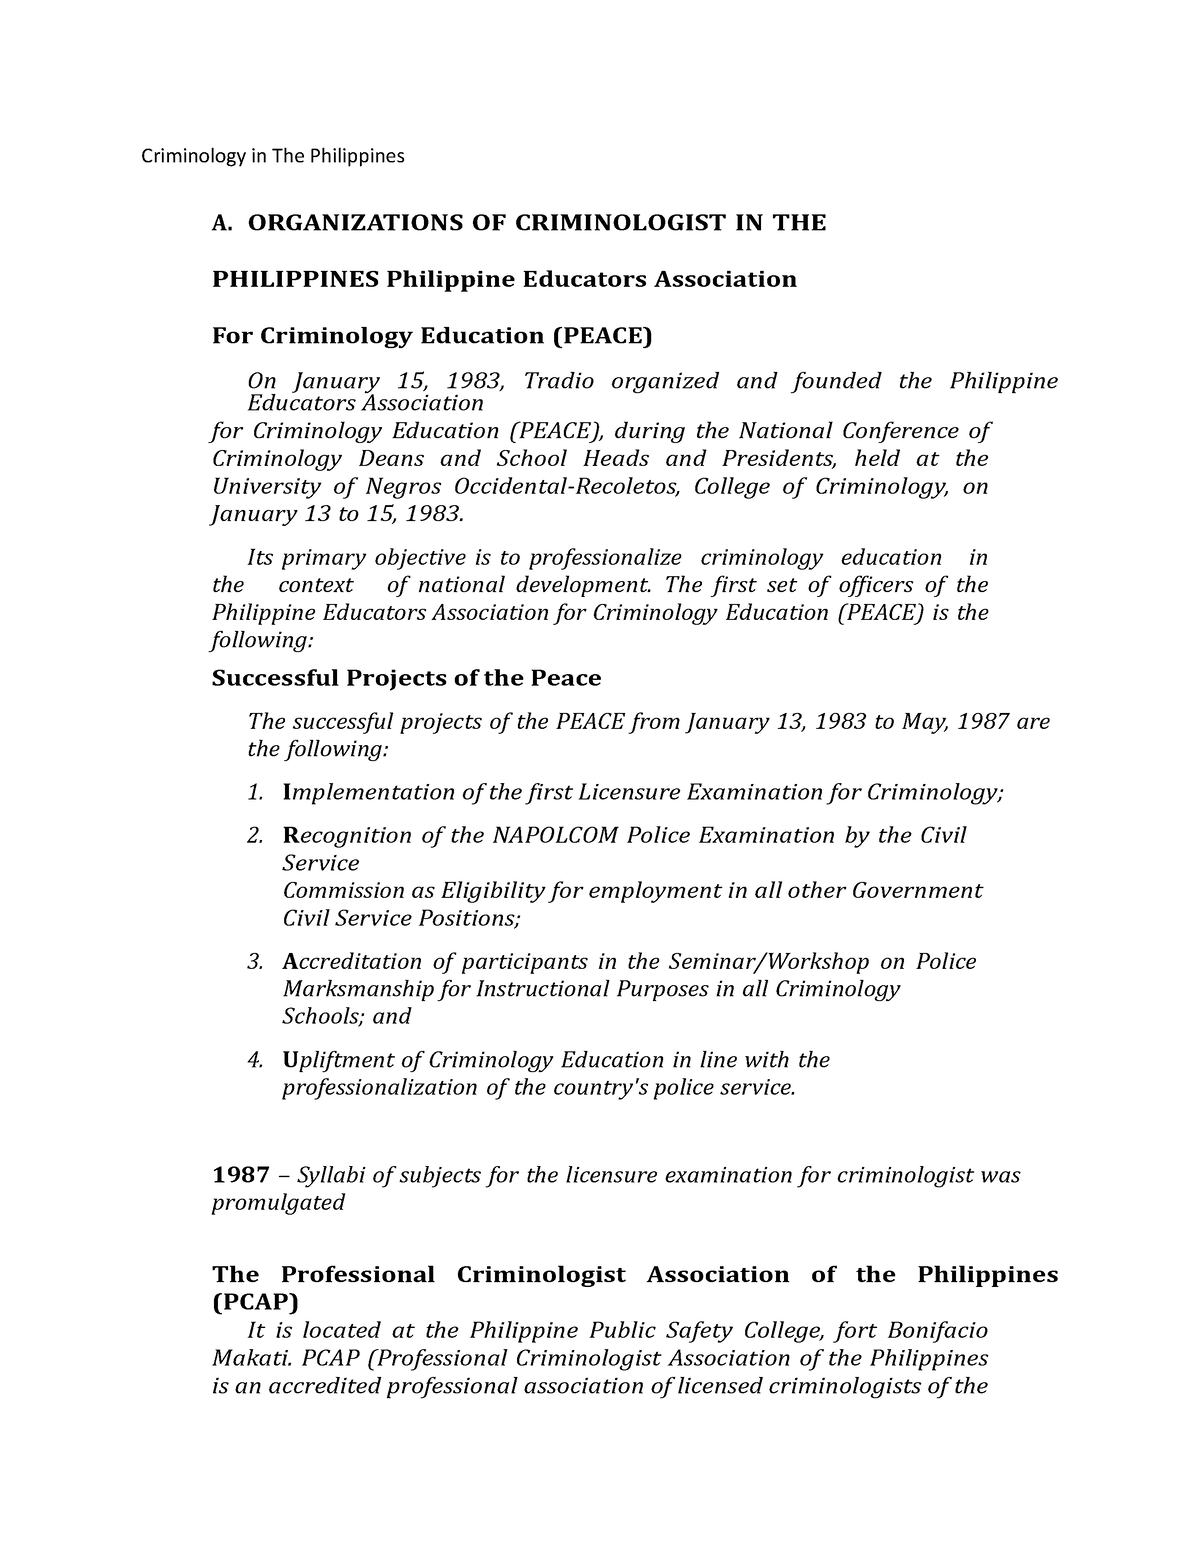 thesis title for criminology in the philippines